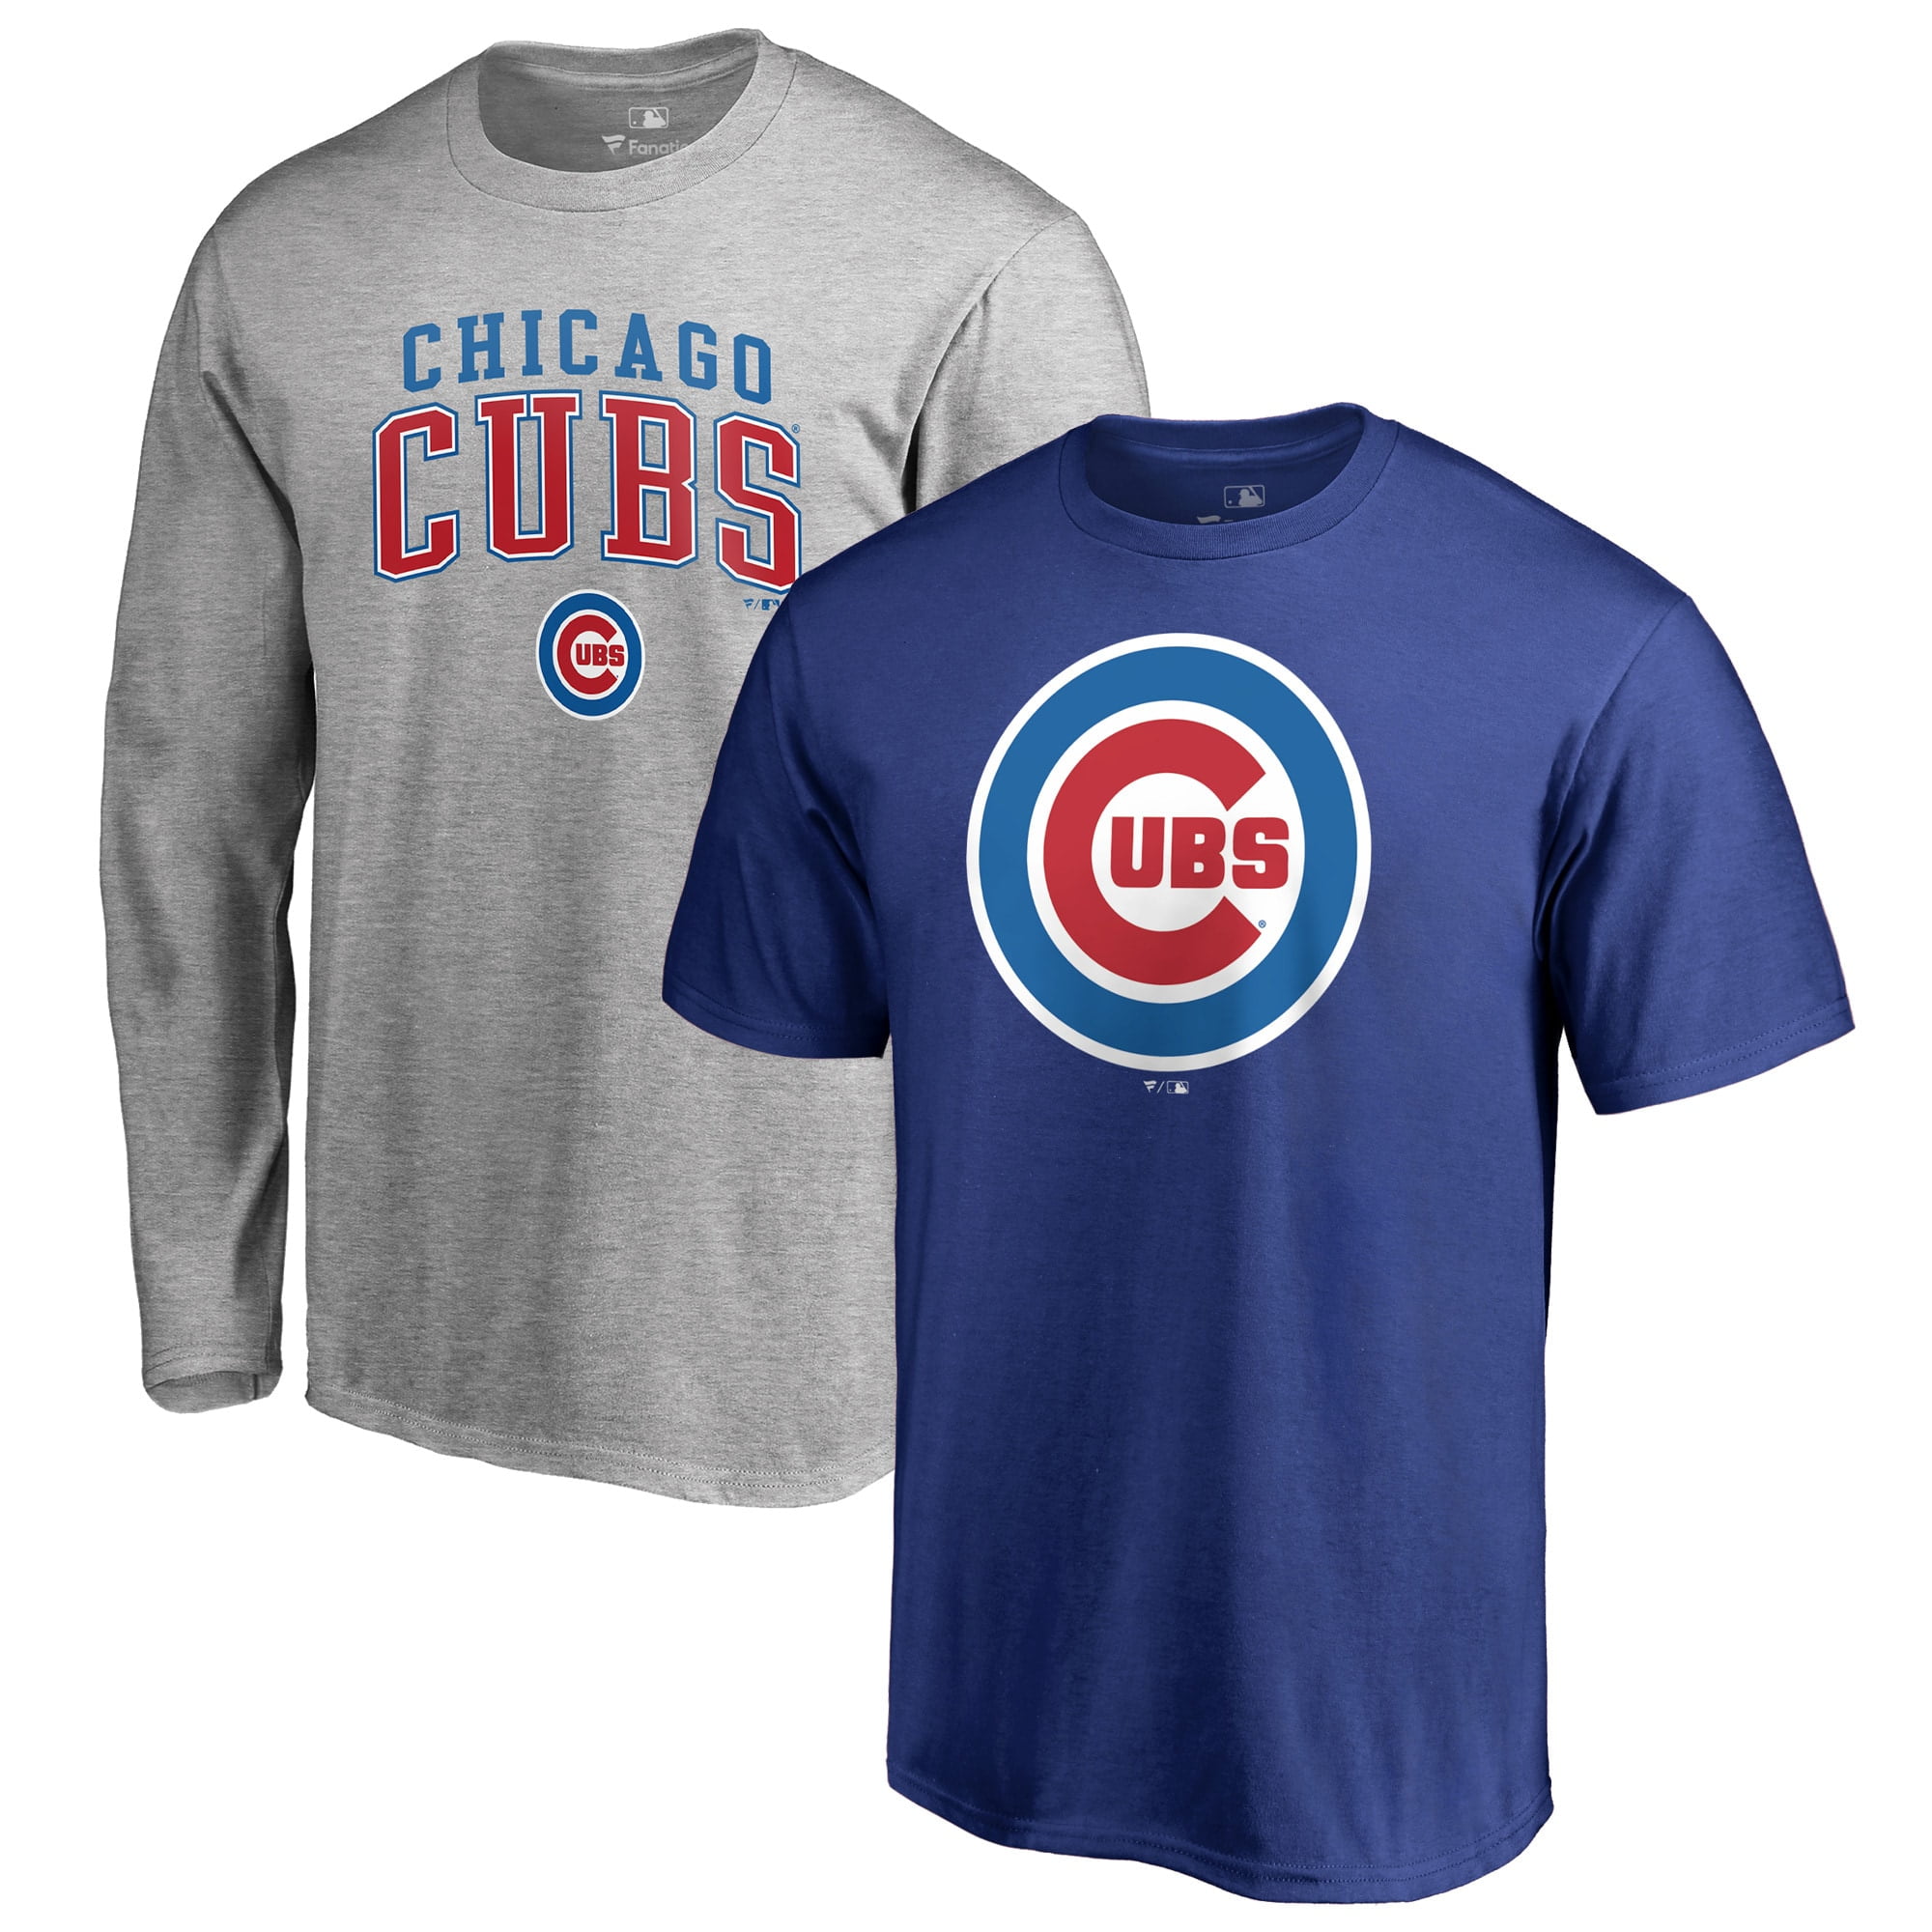 where can i buy a cubs shirt